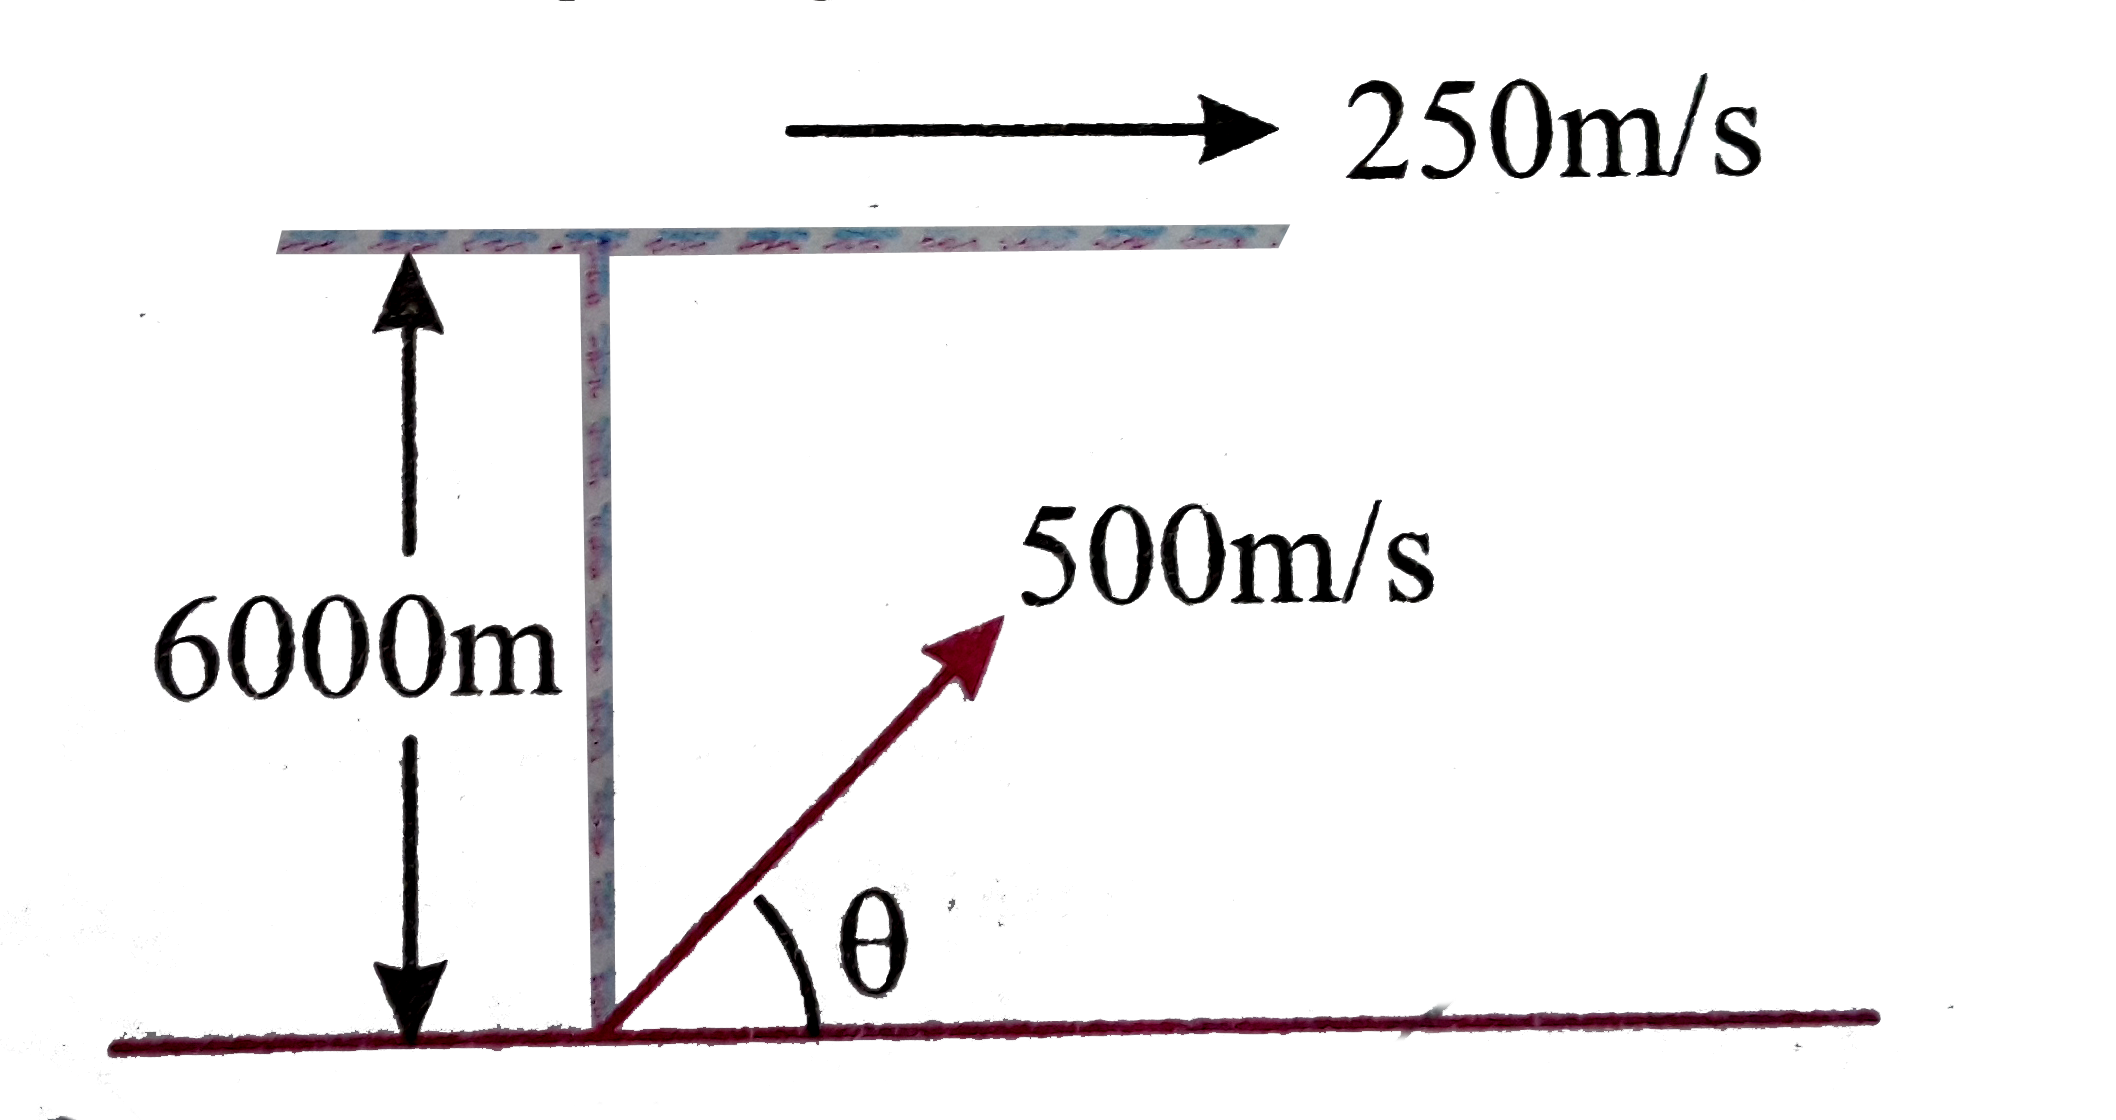 An aircraft moving with a speed of 250 m//s is at a height of 6000m,just overhead of an antiaircraft gun.If the muzzle velocity is 500m//s,the firing angle theta should be: